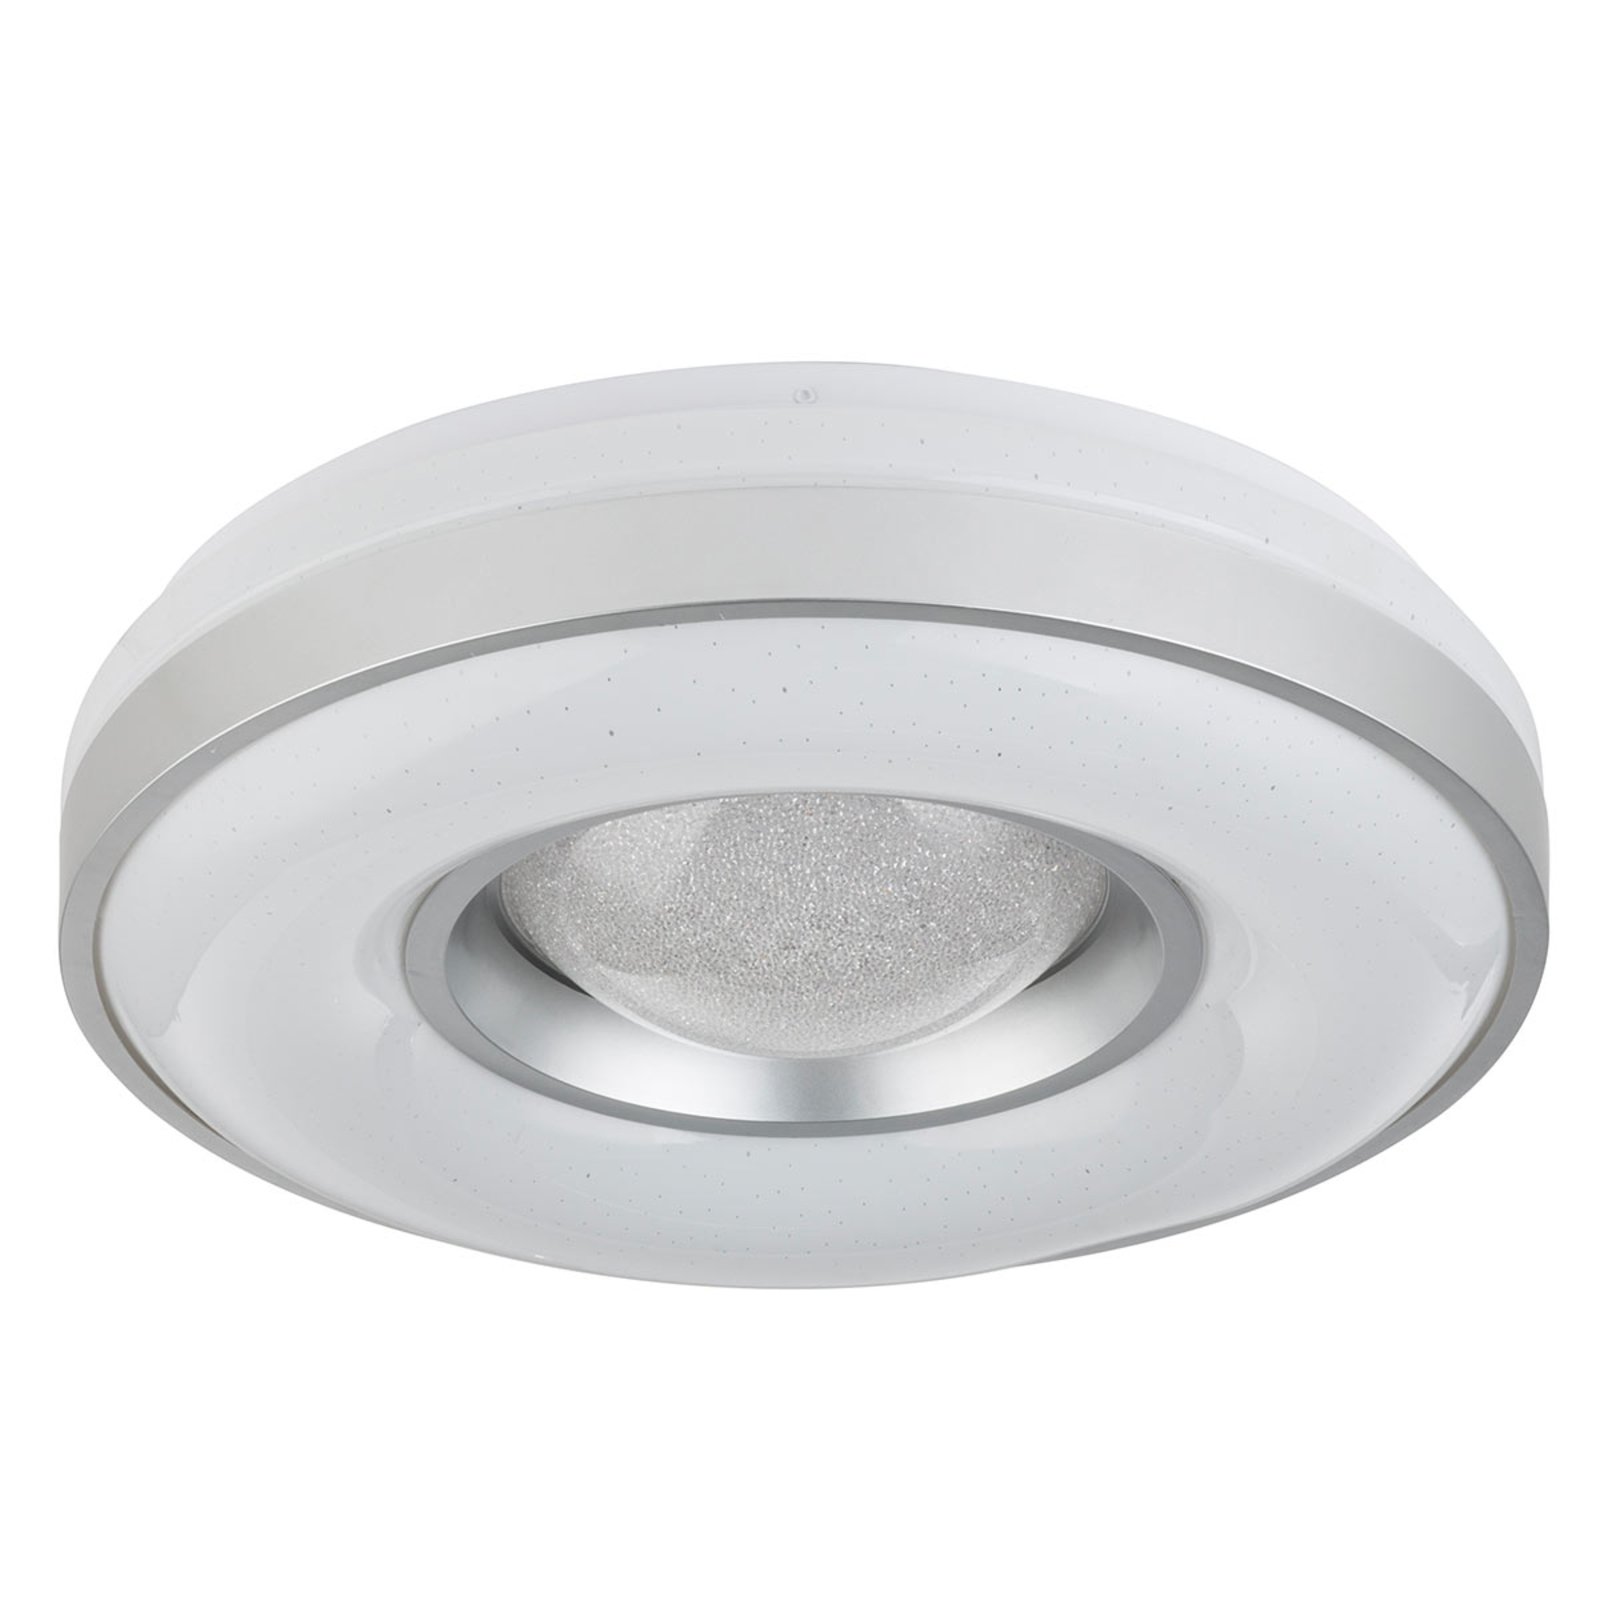 Colla LED ceiling lamp with metal frame in silver